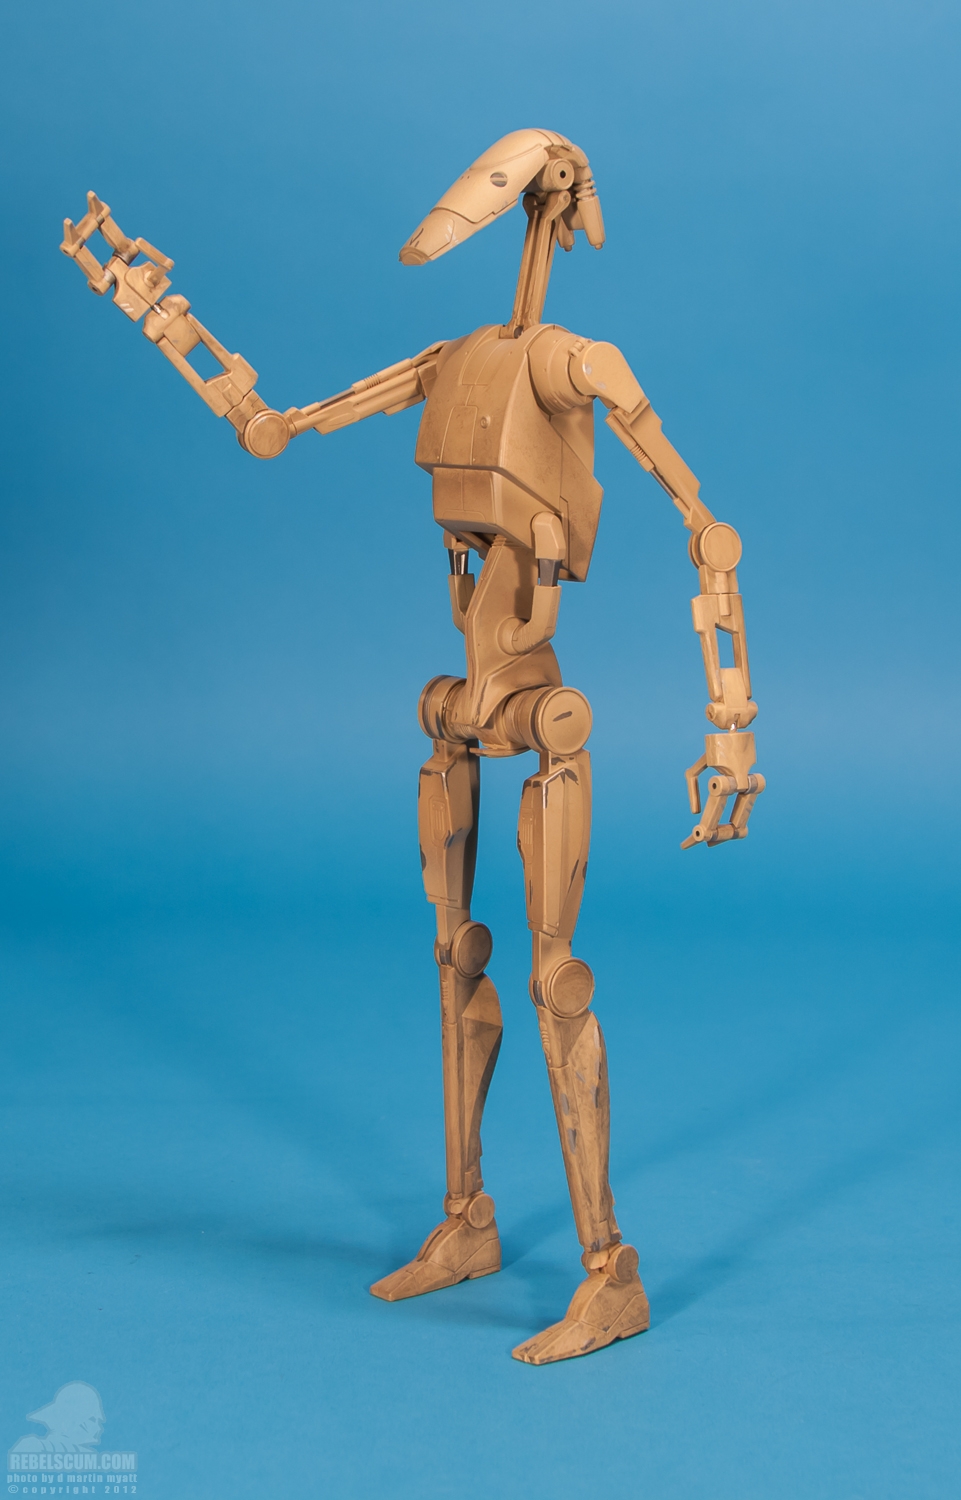 STAP_Battle_Droid_Star_Wars_Sideshow_Collectibles-07.jpg